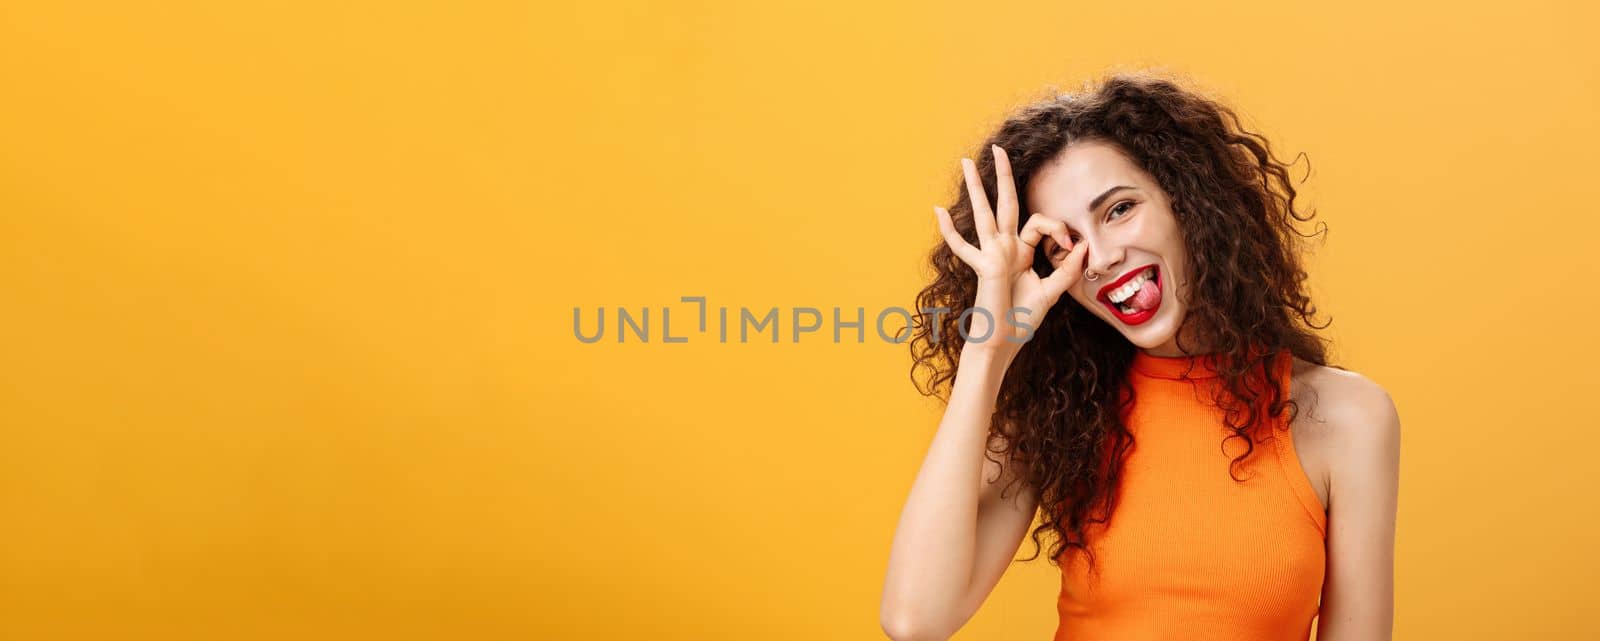 Carefree optimistic and energized good-looking woman. with curly hairstyle tilting head and sticking out tongue playfully showing okay or excellent sign over eye posing near orange background.